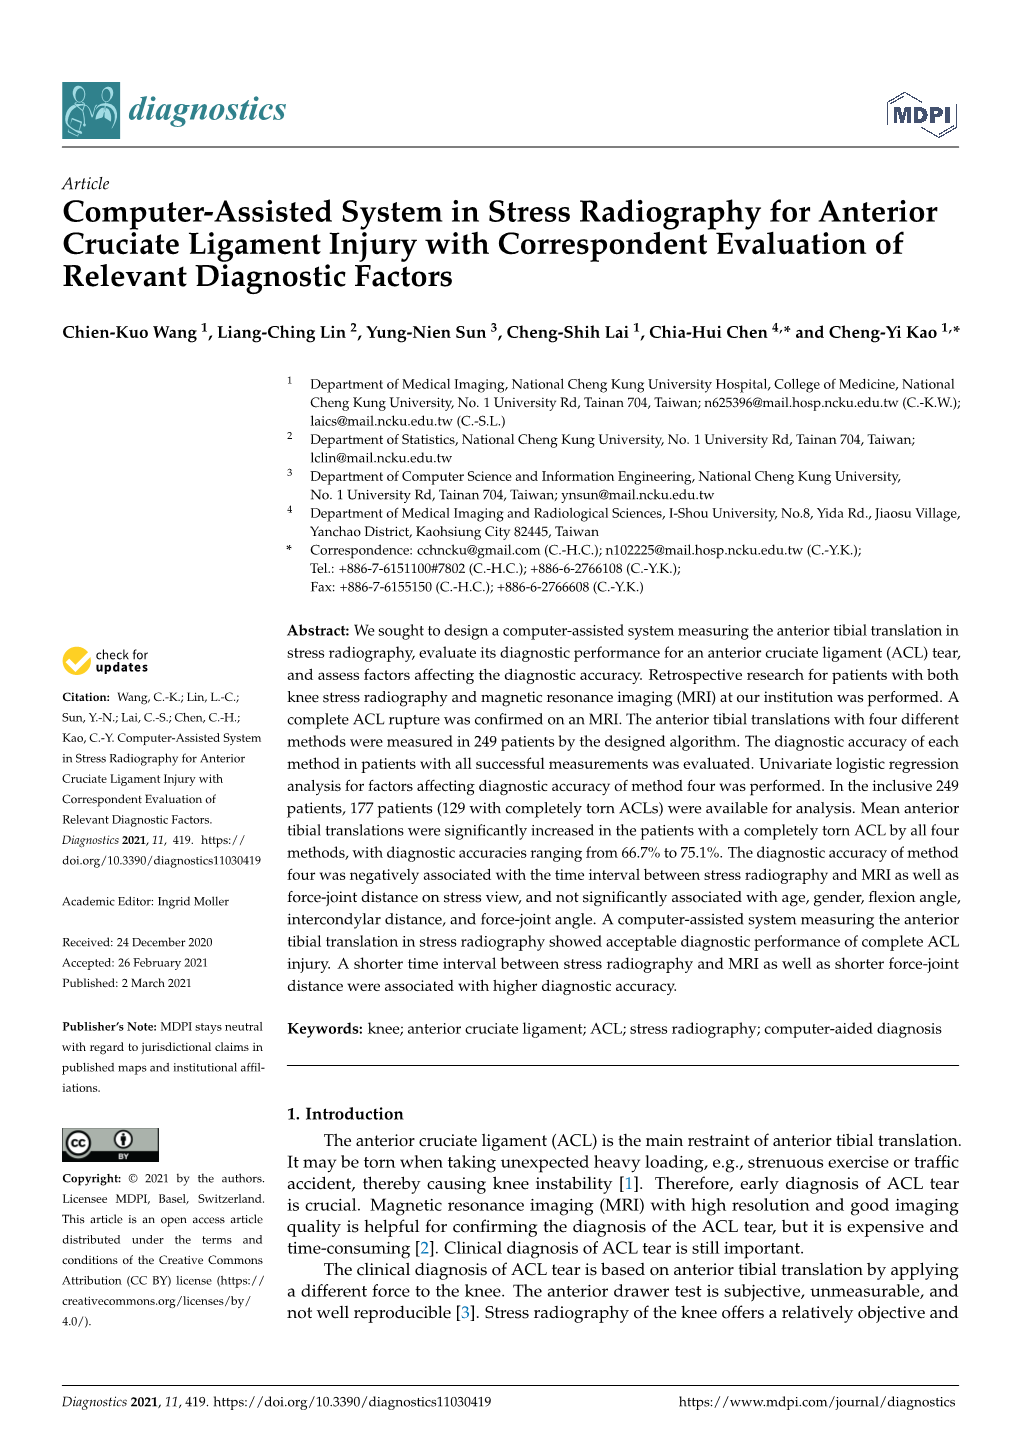 Computer-Assisted System in Stress Radiography for Anterior Cruciate Ligament Injury with Correspondent Evaluation of Relevant Diagnostic Factors